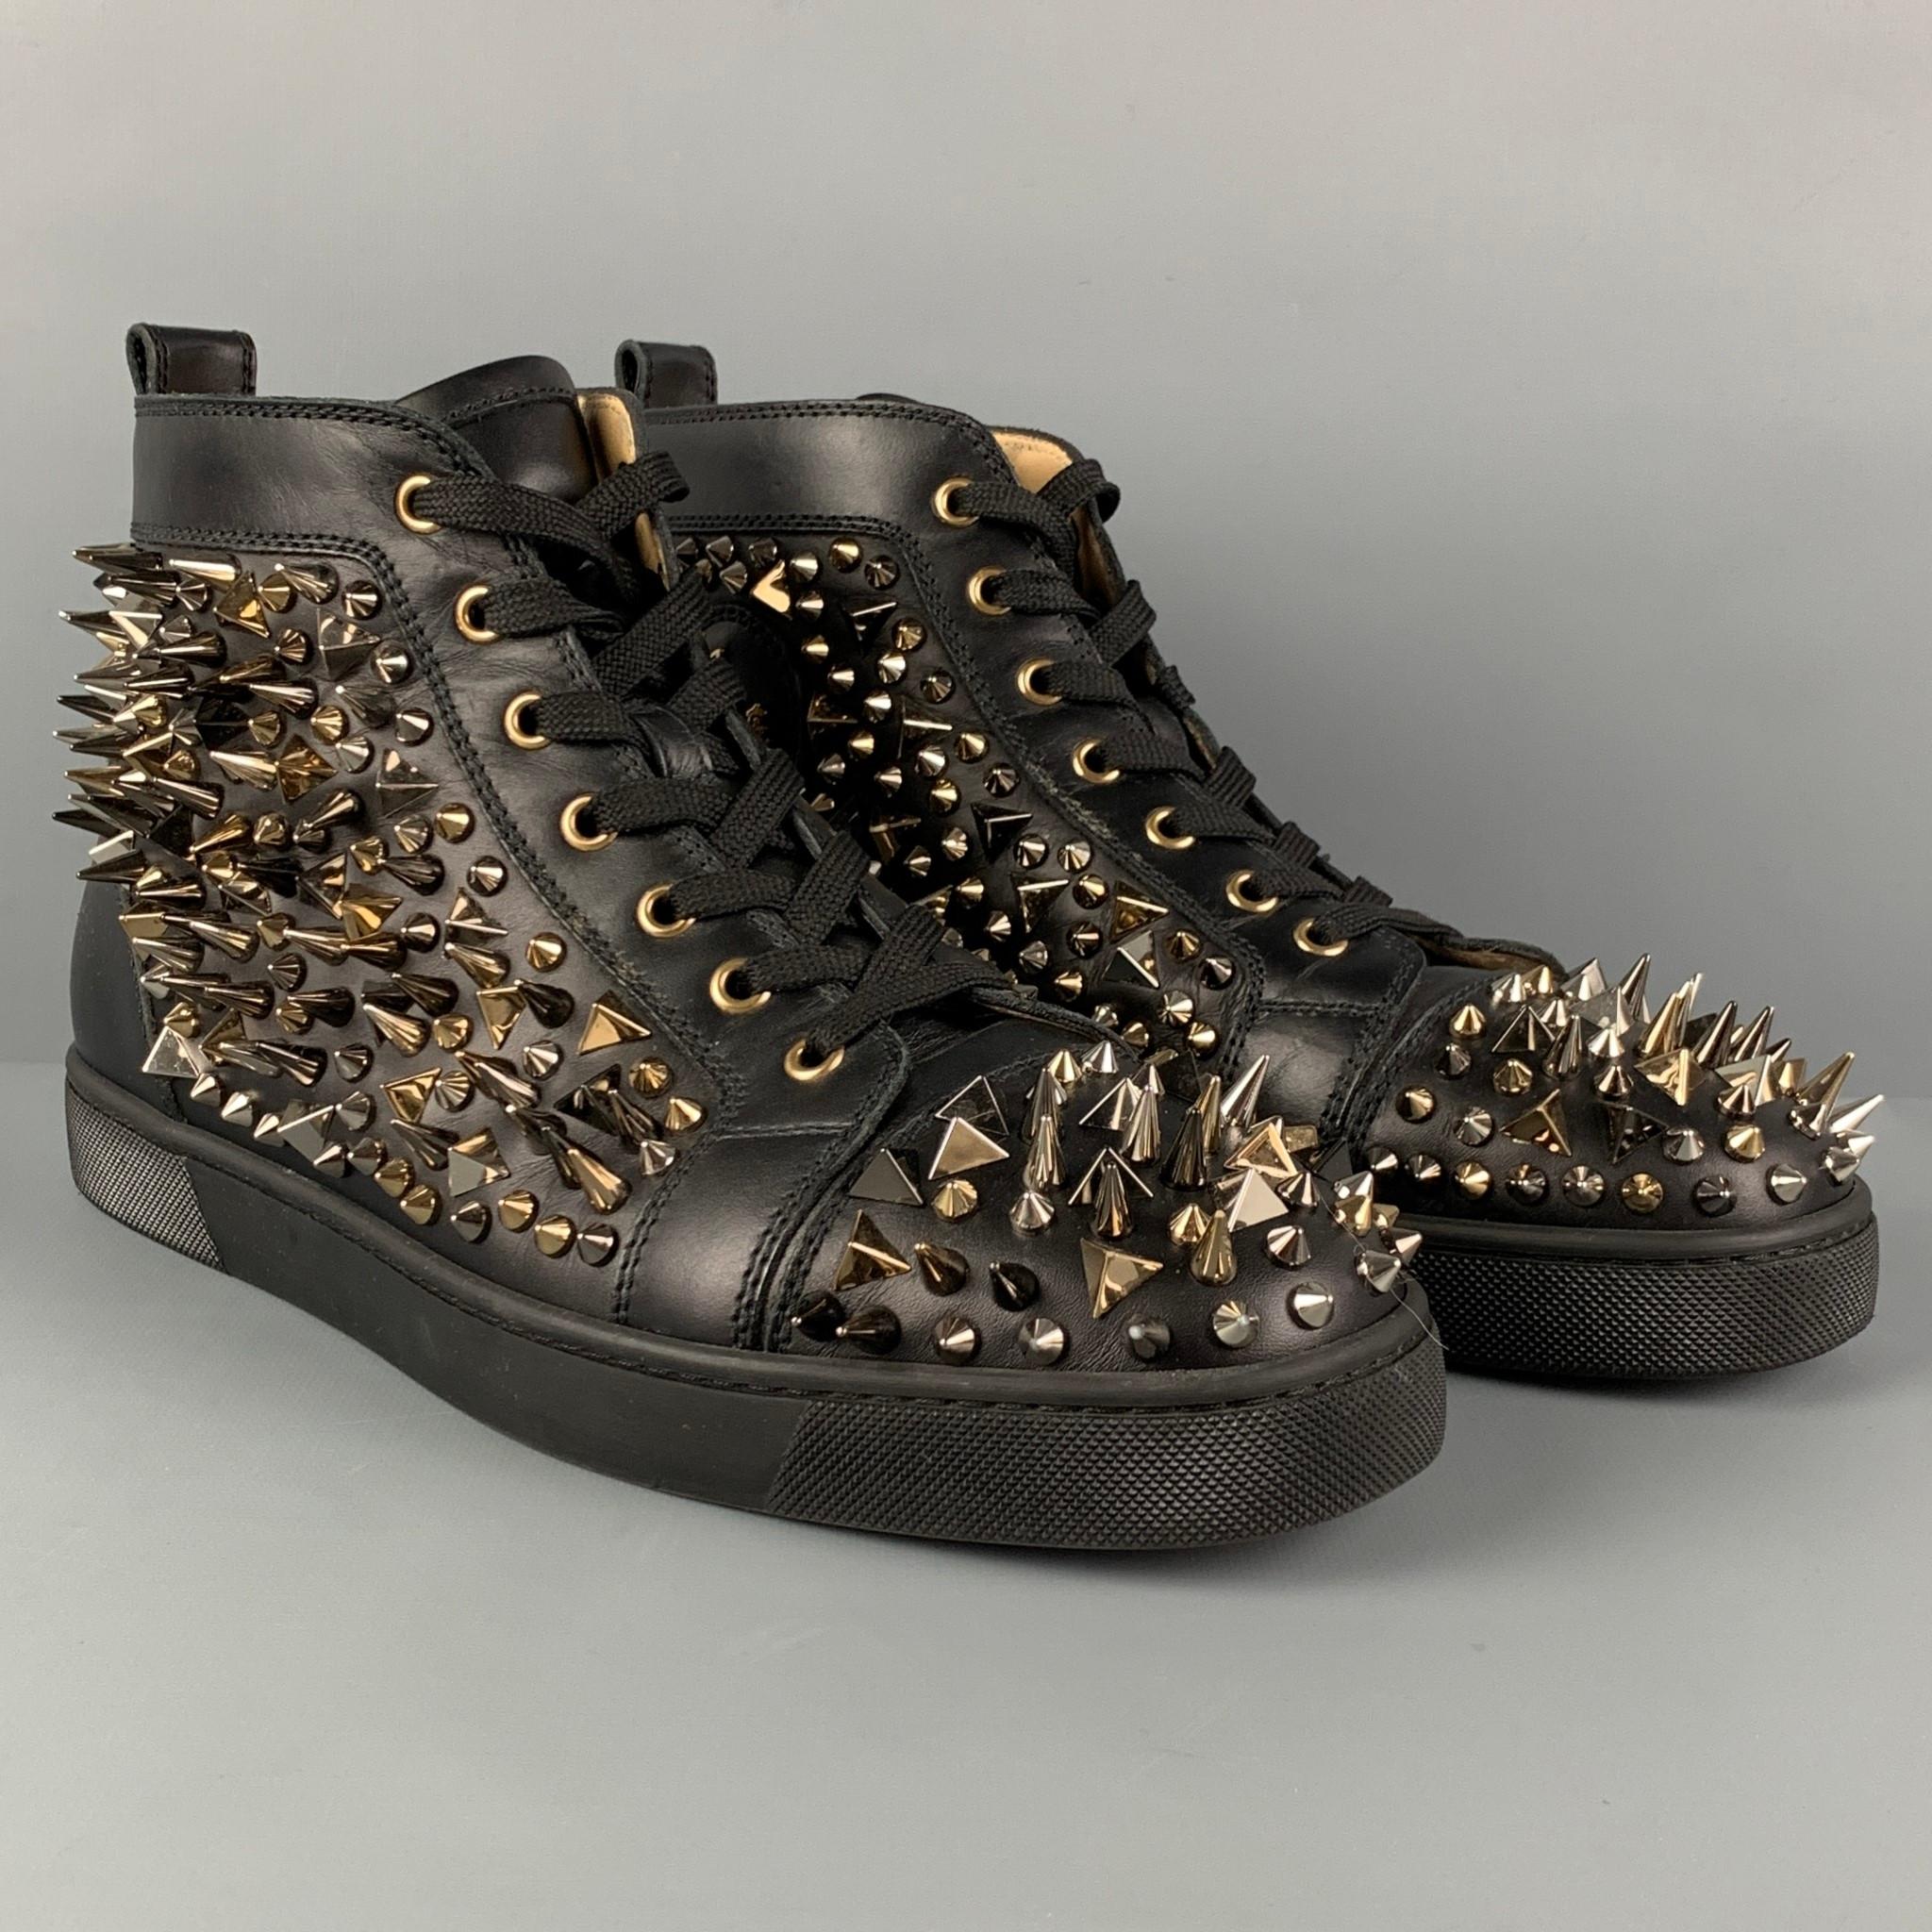 CHRISTIAN LOUBOUTIN 'Louis All Over Spikes High Top' sneakers comes in a black leather featuring silver & gold tone spike details throughout, high-top, signature red sole, and a lace up closure. Comes with dust bag. 

Very Good Pre-Owned